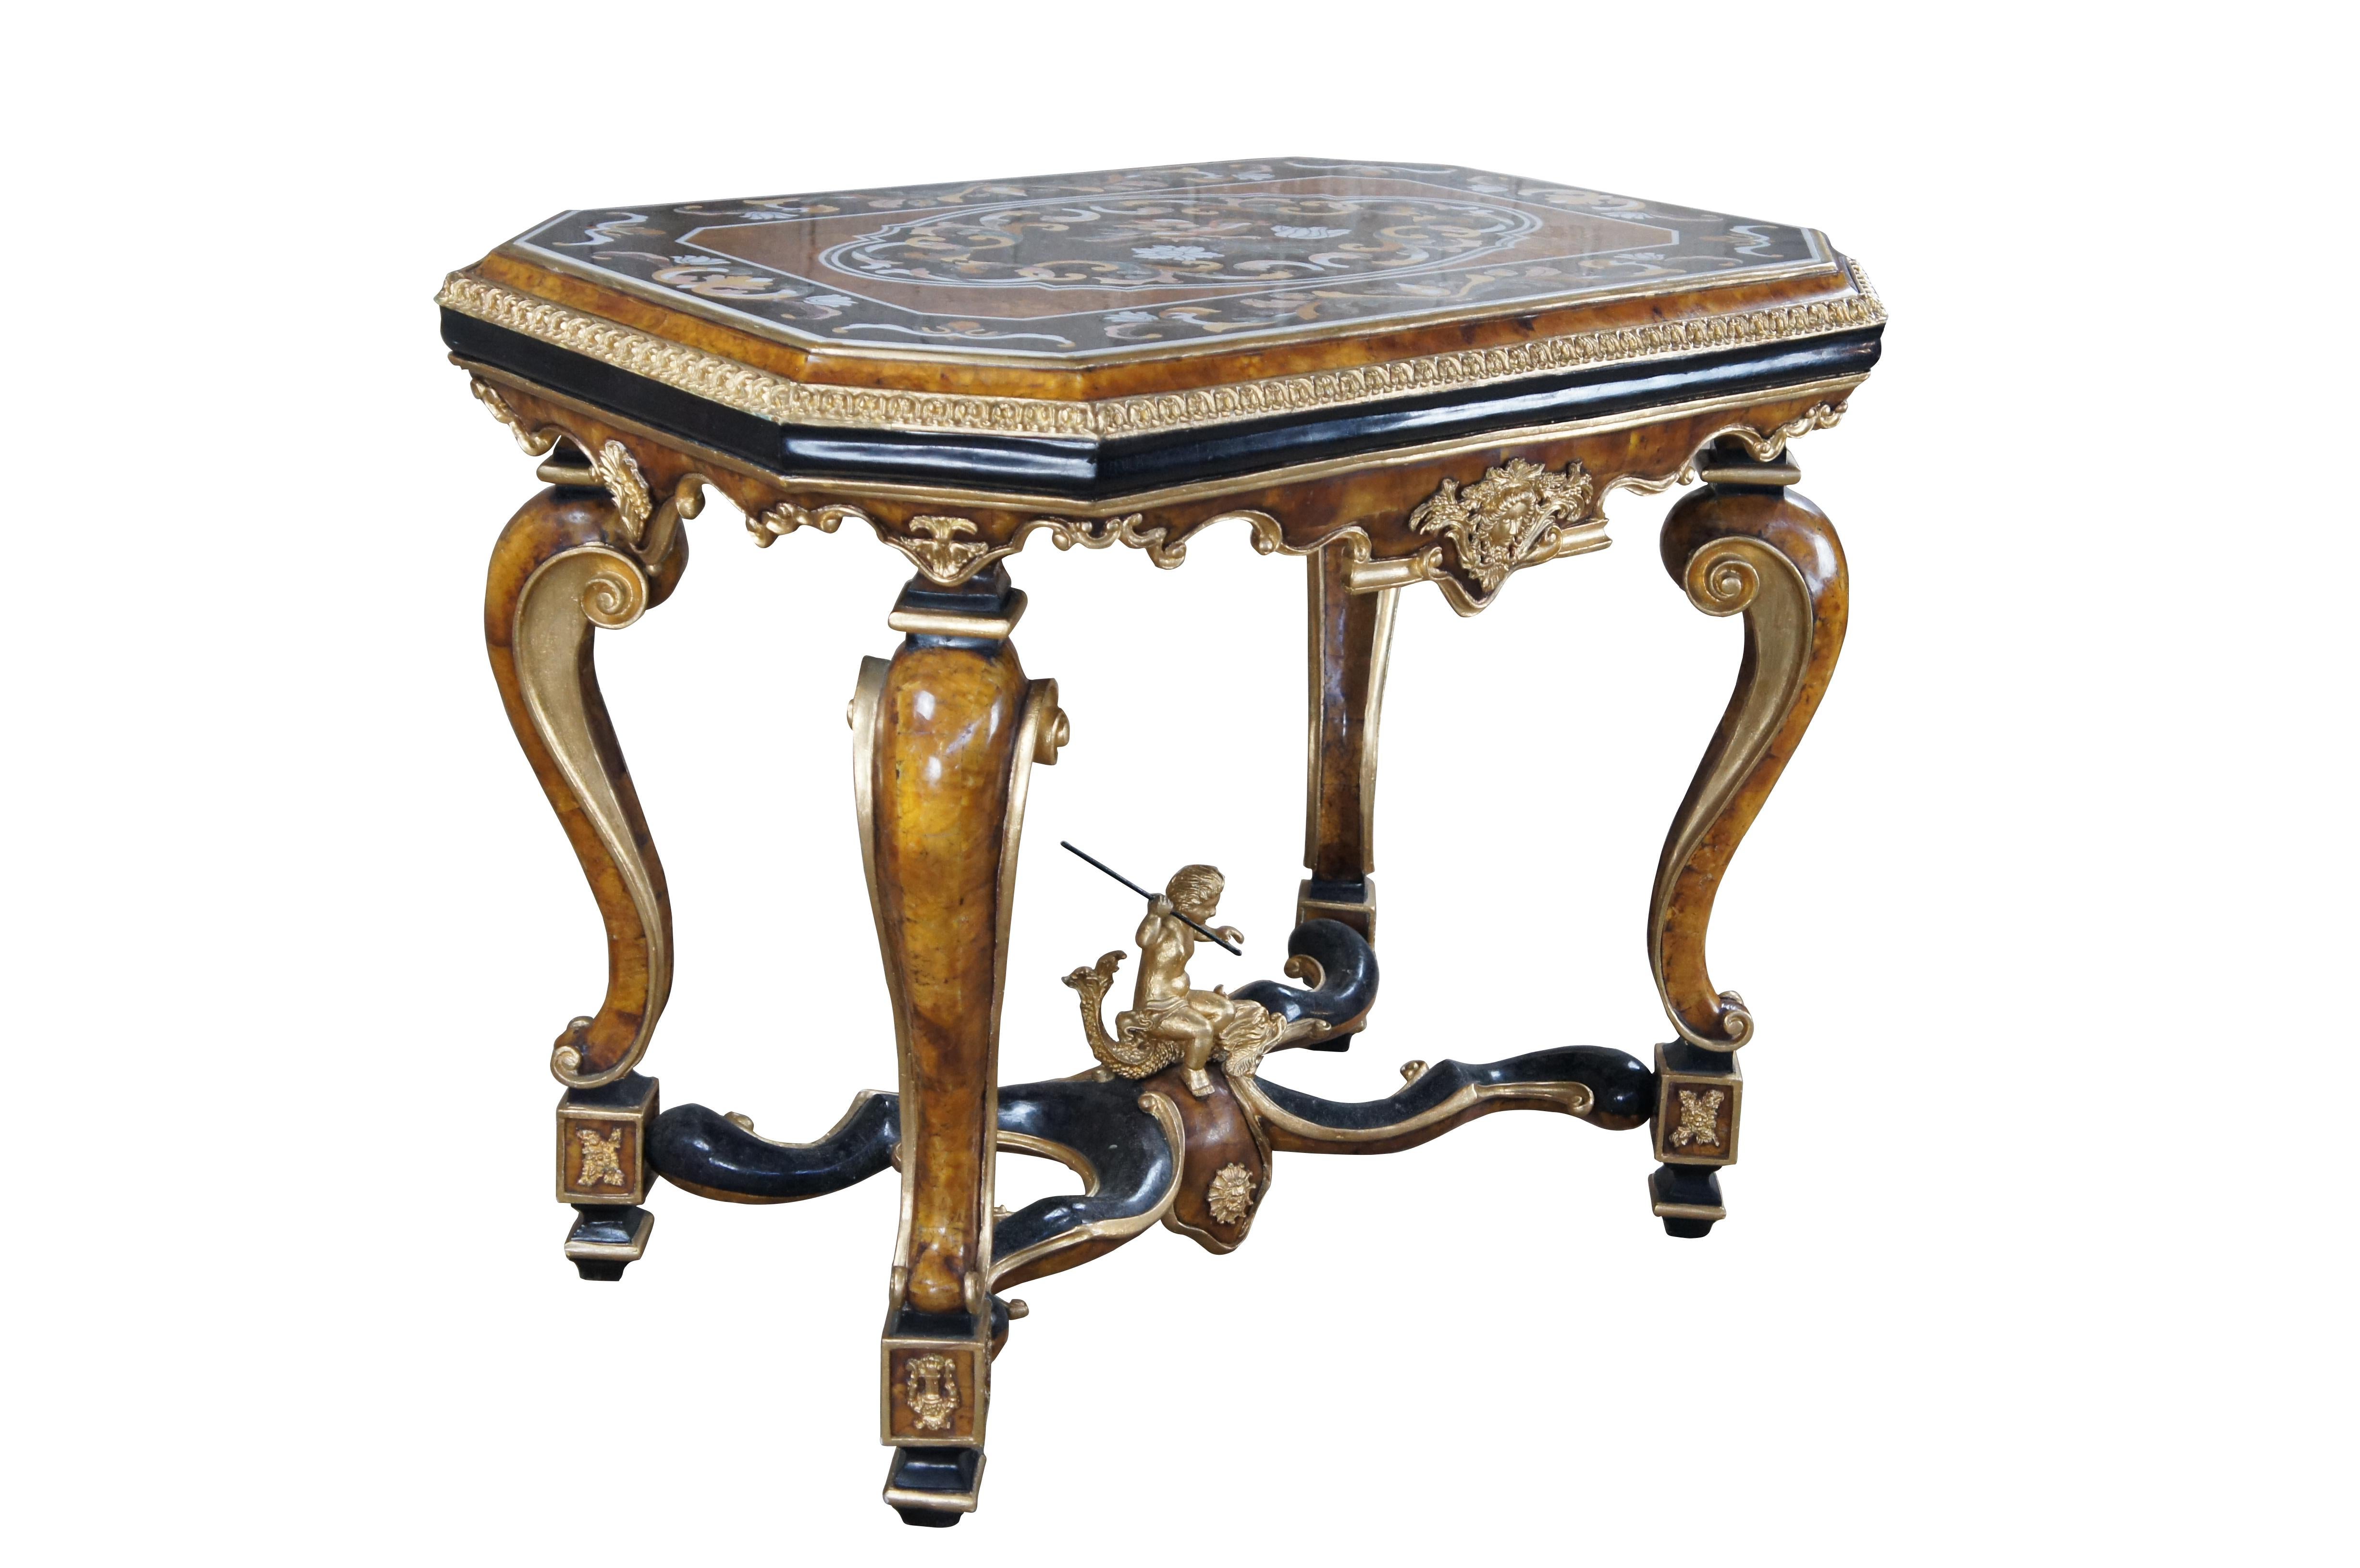 Monumental Italian Napoleon III inspired salon, center or console table. Having a octagonal formed exotic pietra dura marble inlaid top with pen shell and stone inlays. Features a carved gilt molding resting on 